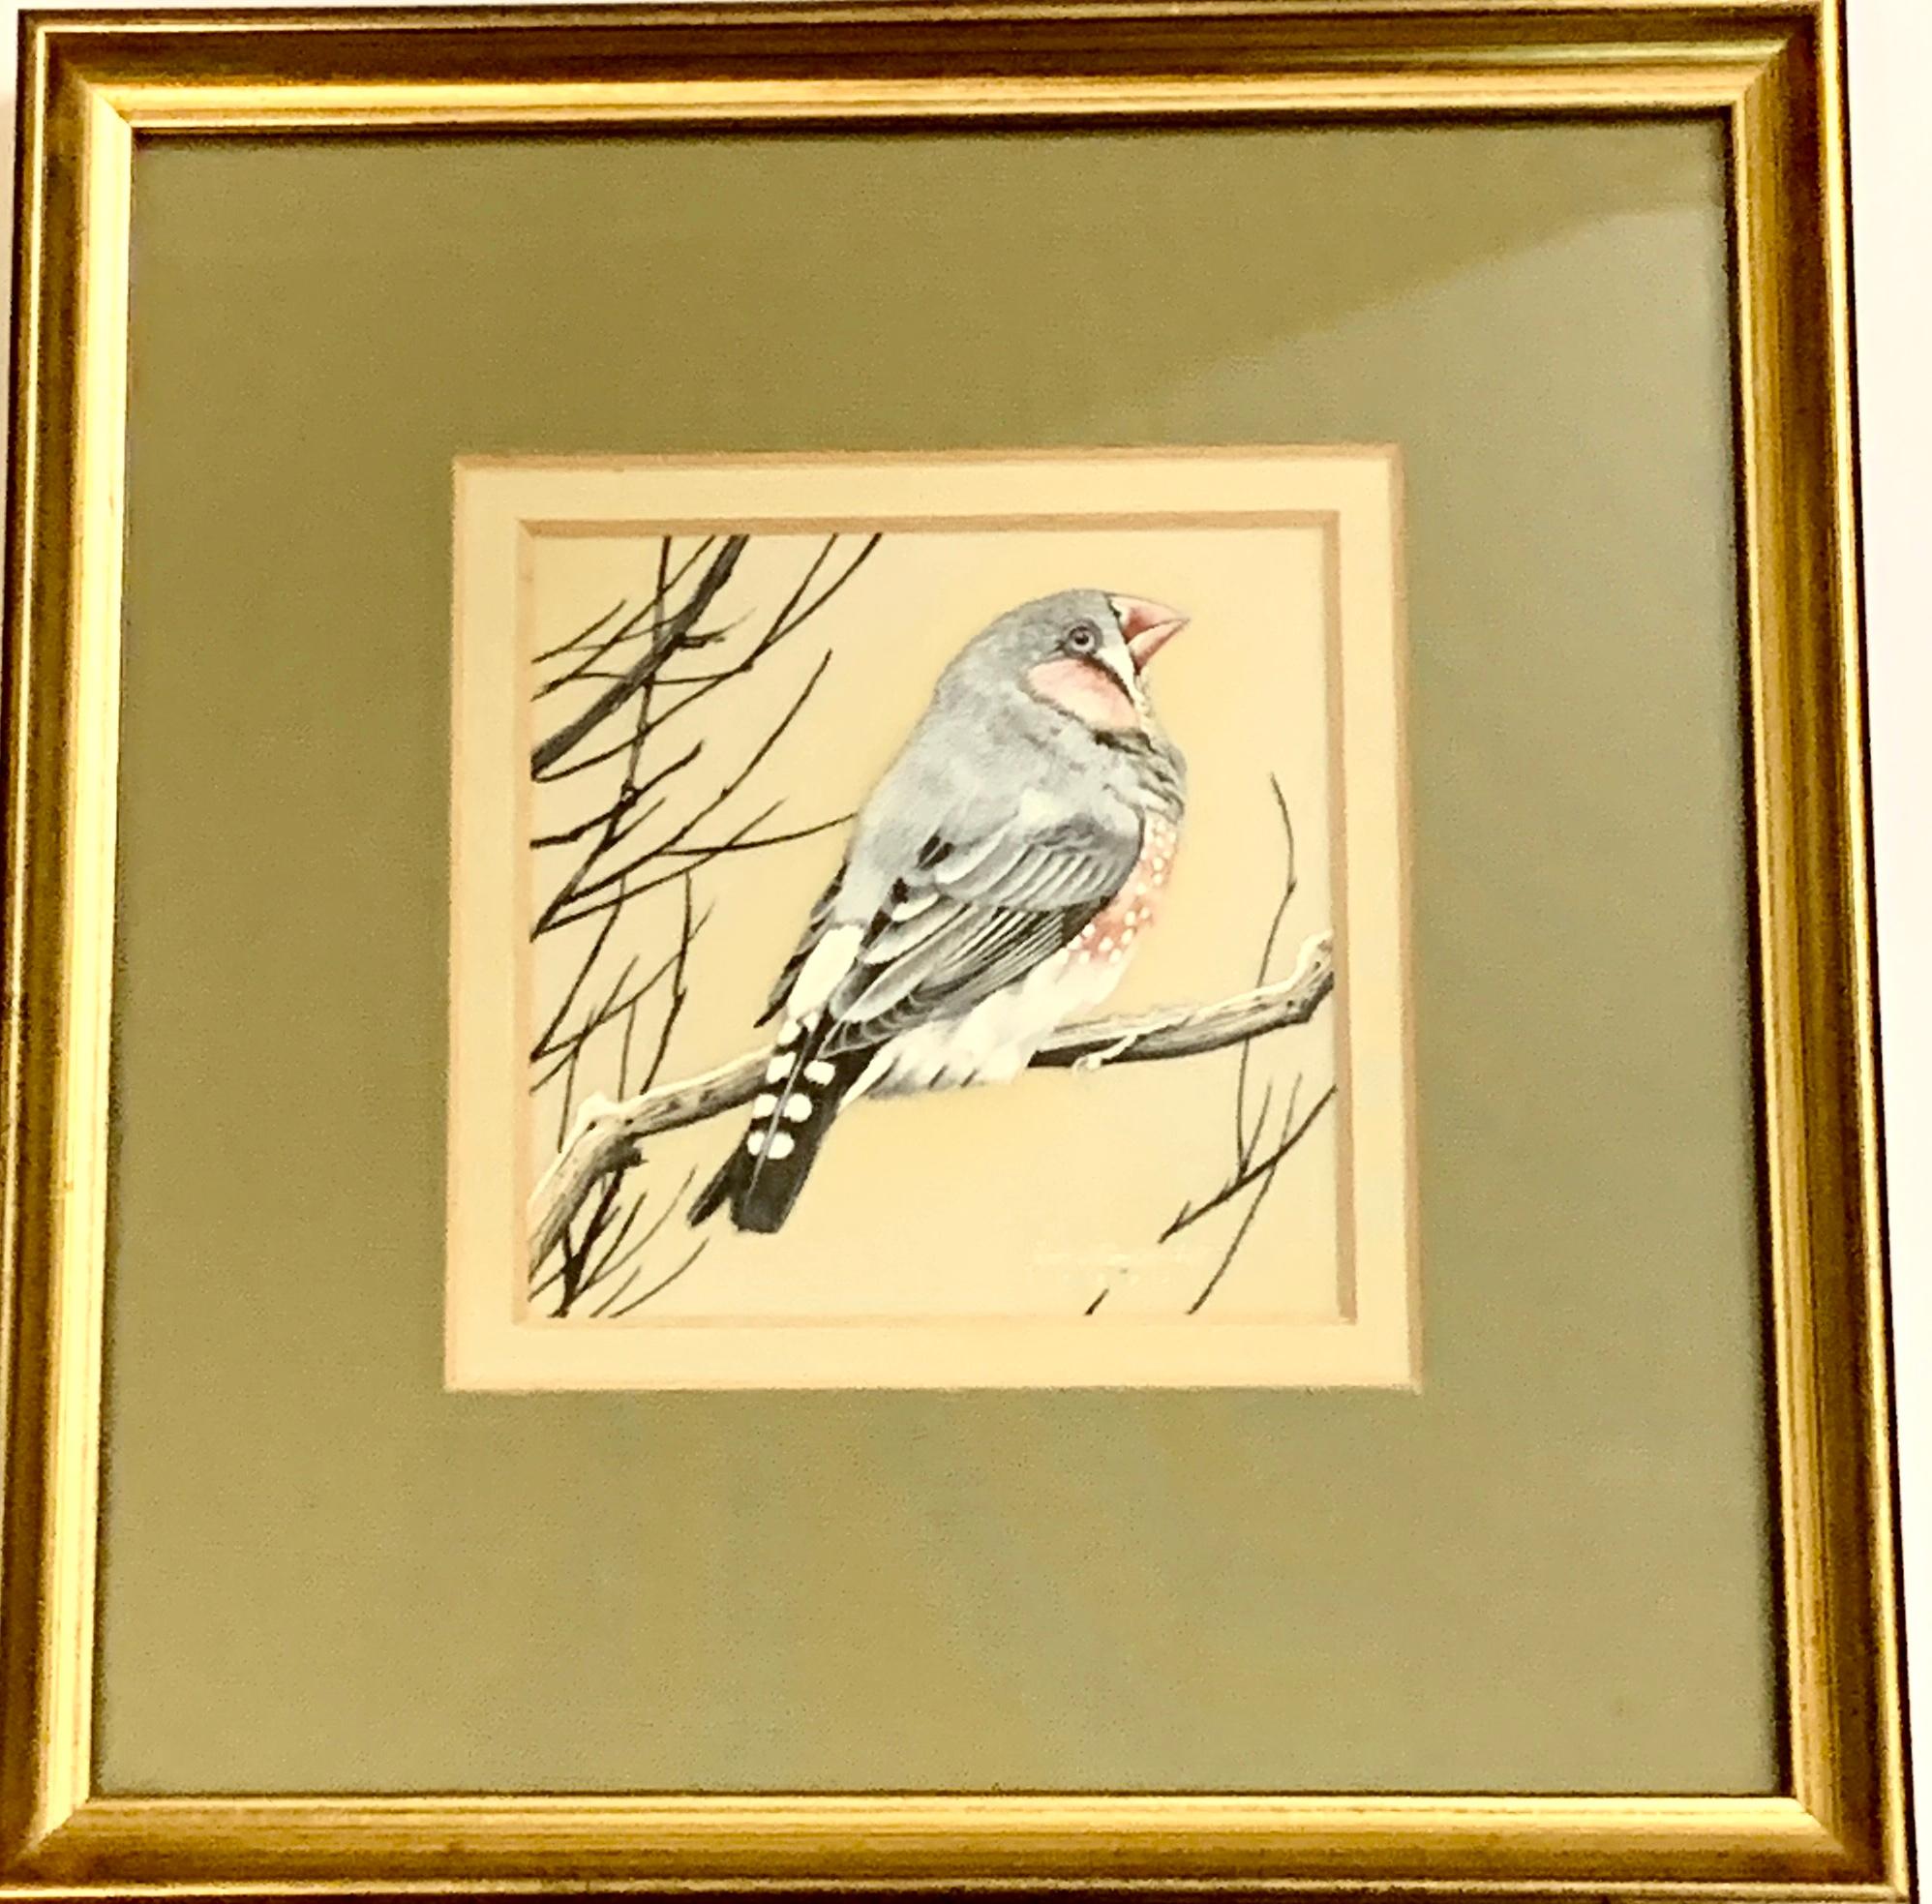 English 20th century study of a Finch bird seated on a snow covered branch